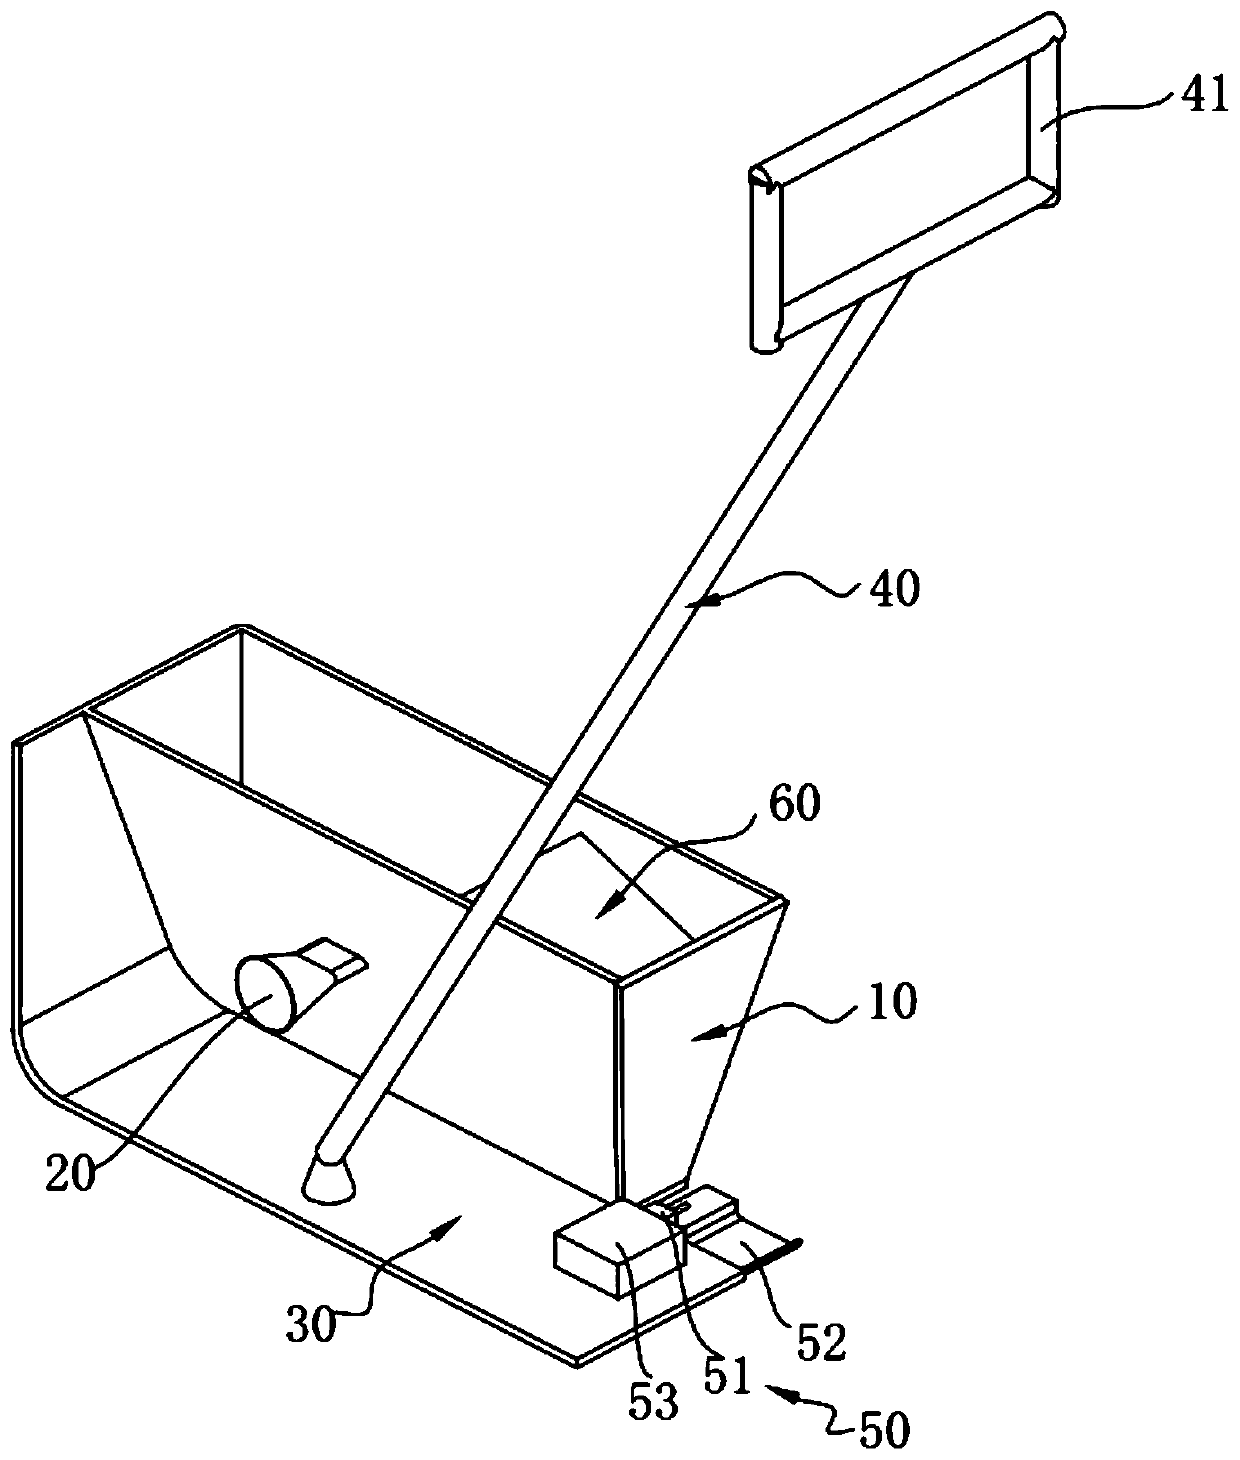 Curbstone and gutter apron gap filling device